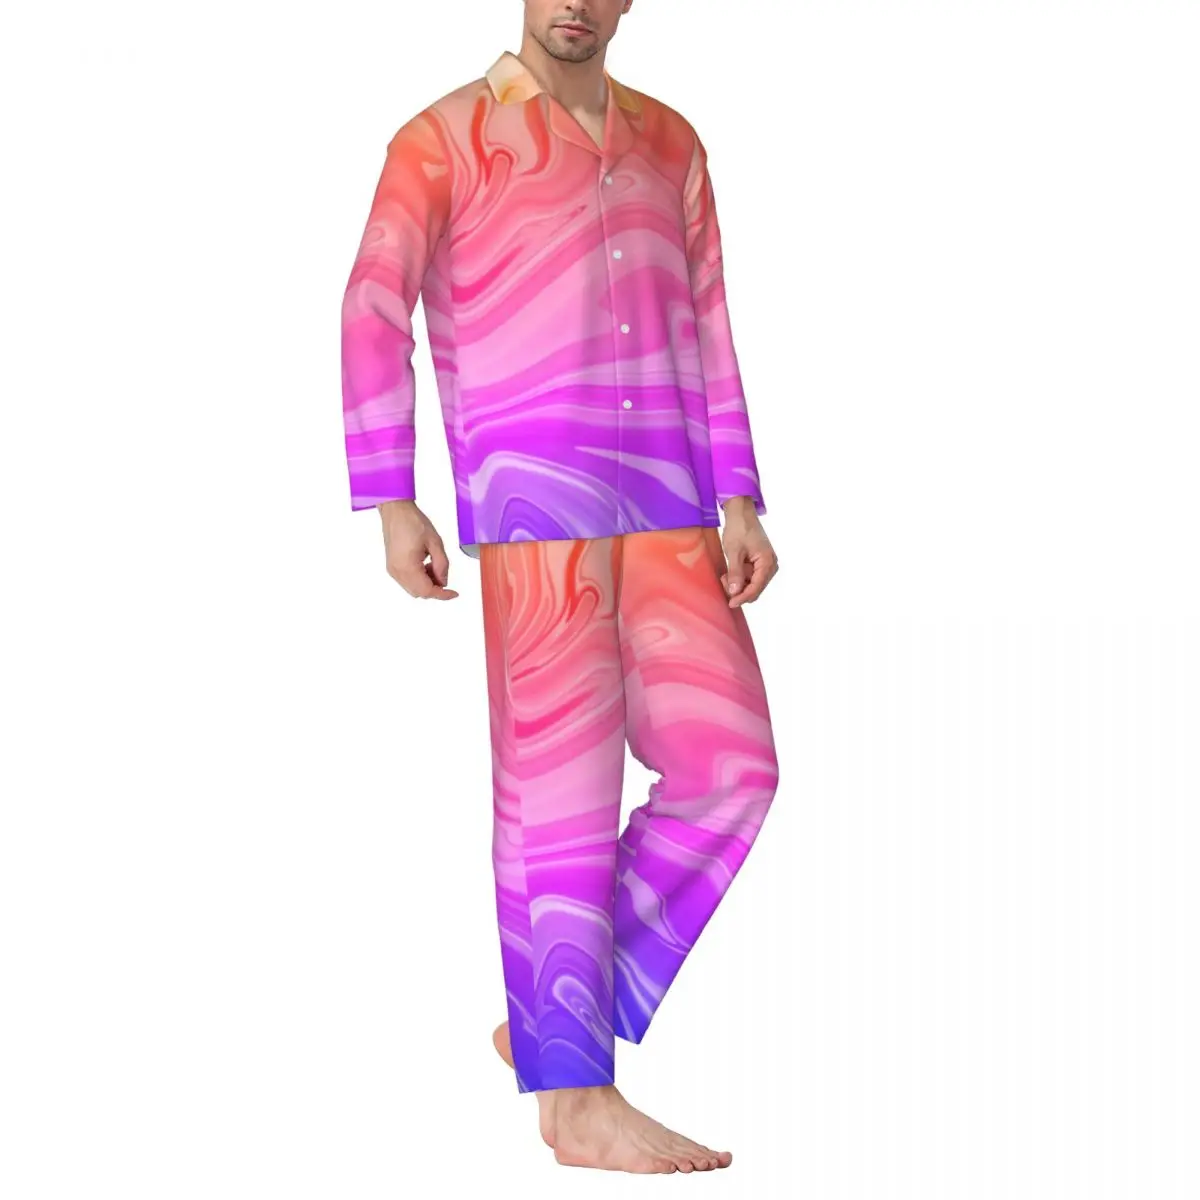 

Blue Pink Ombre Pajamas Men Gradient Abstract Print Fashion Daily Sleepwear Autumn 2 Piece Casual Oversize Printed Pajama Sets